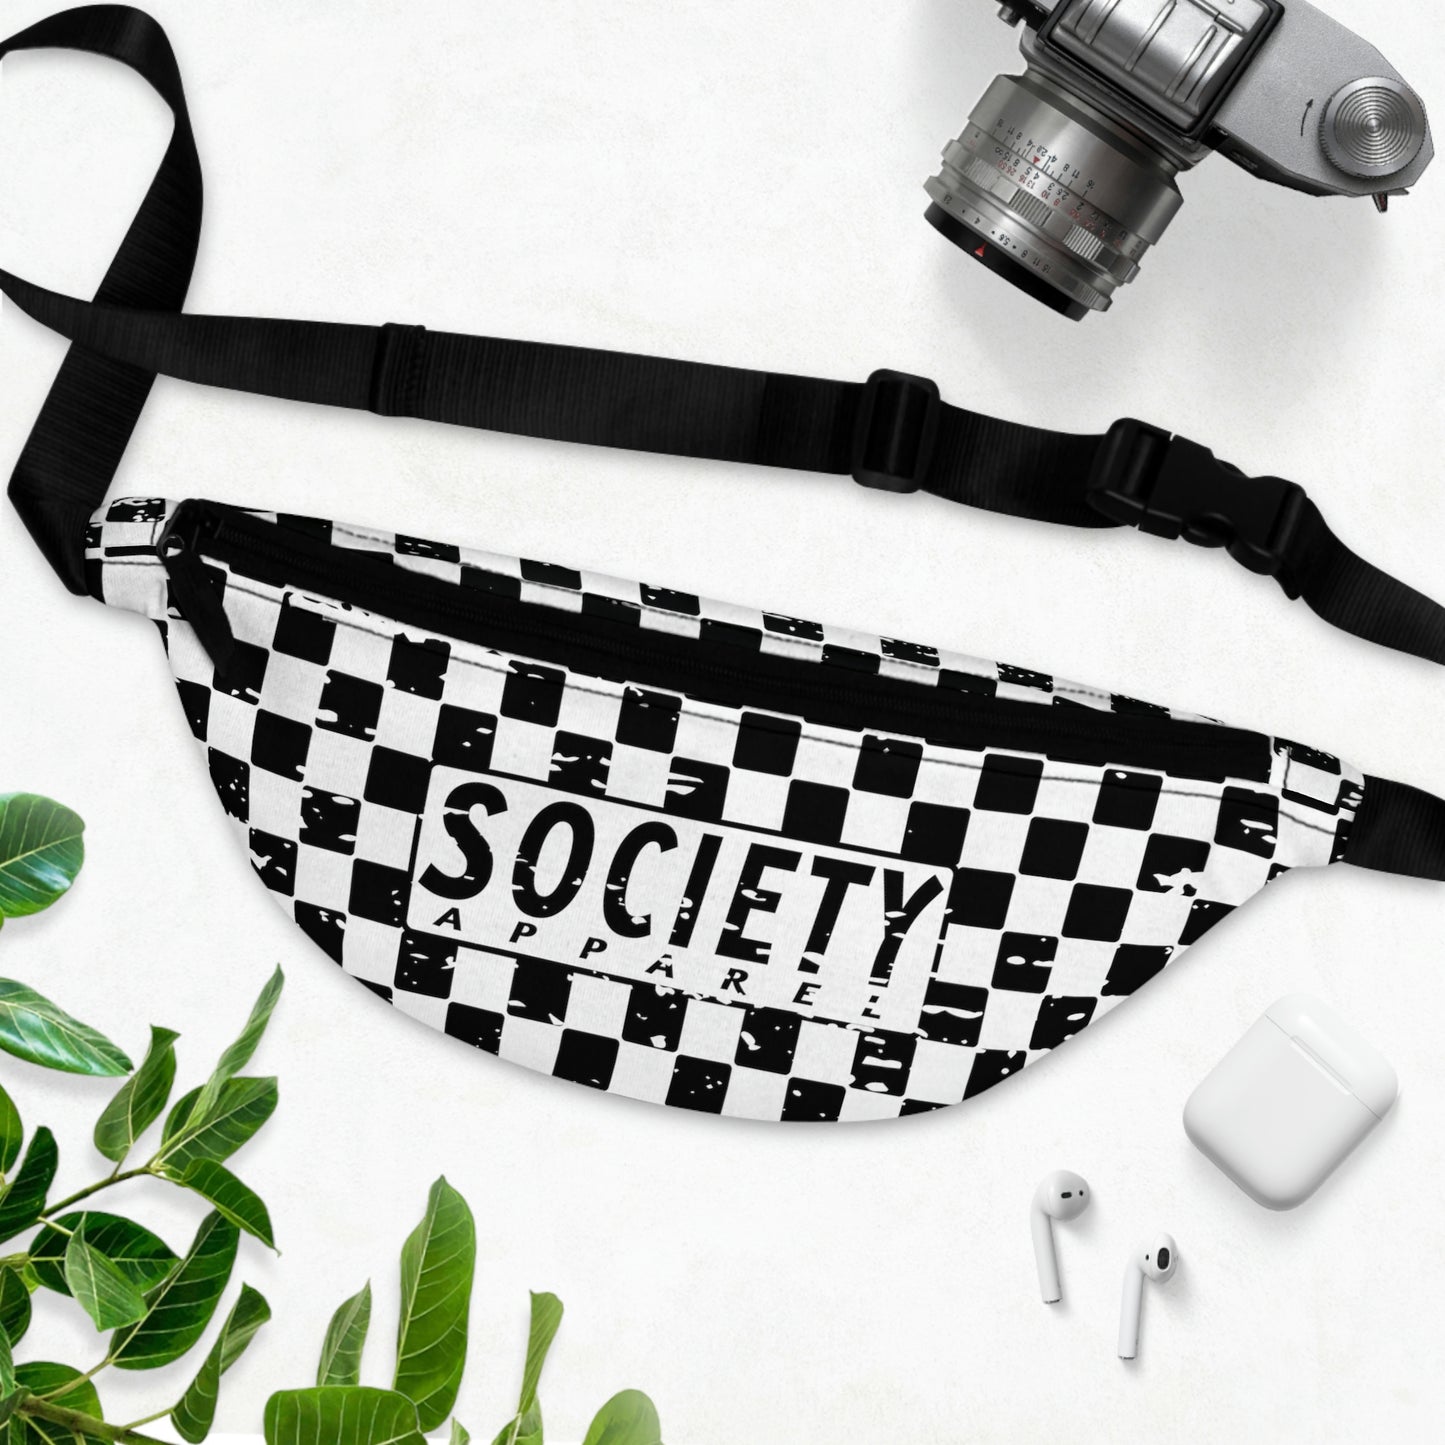 society essentials • deluxe edc carrier (white/black)